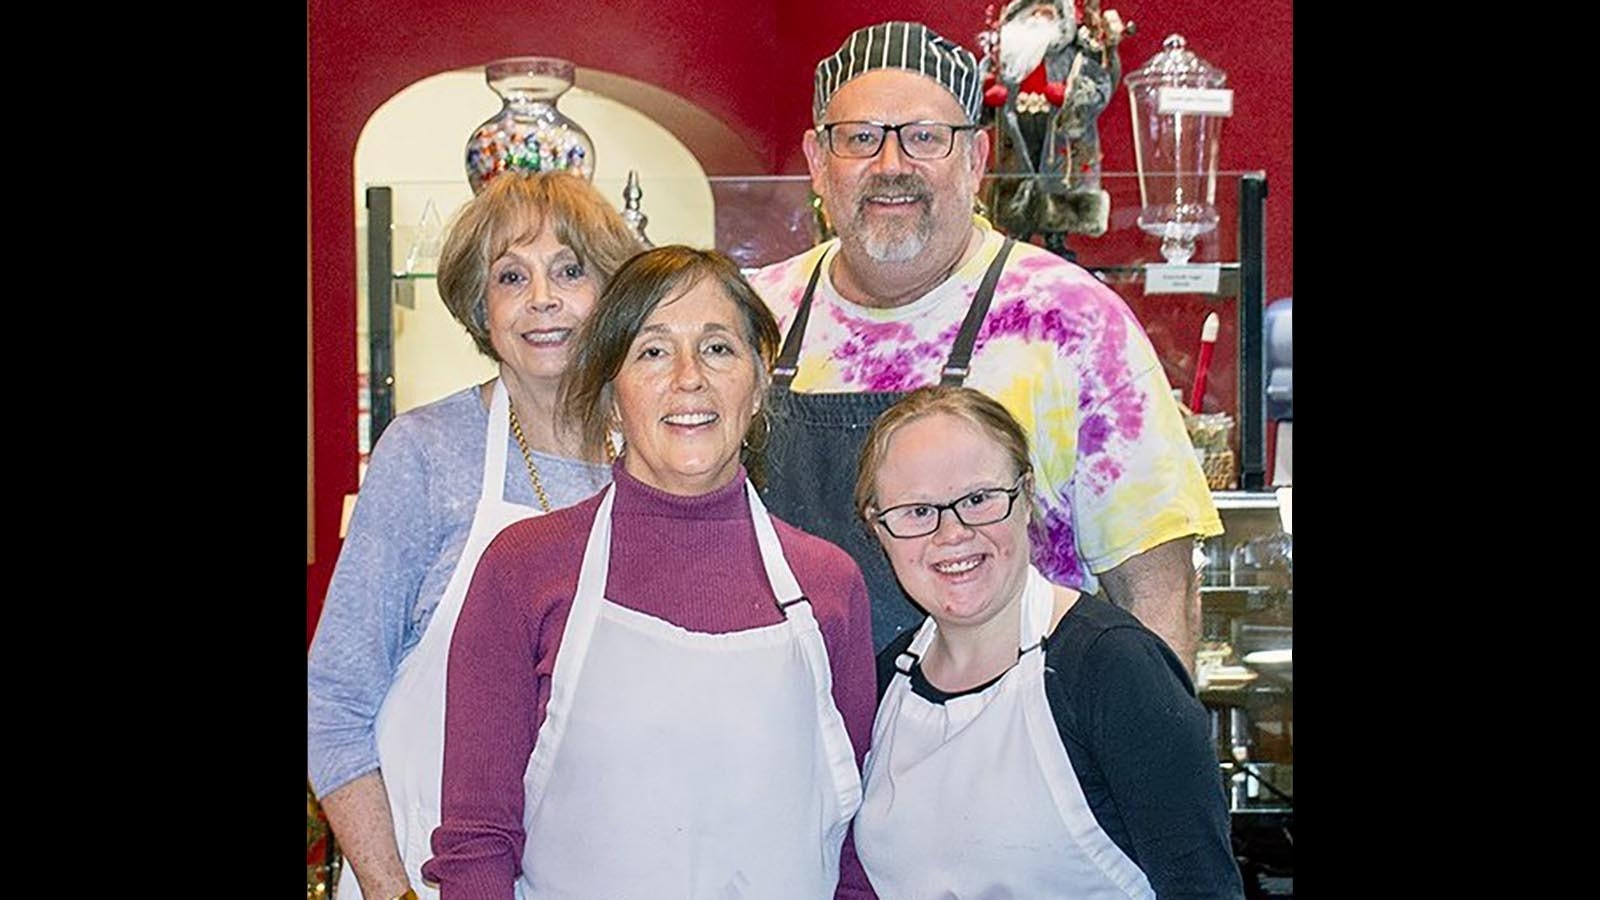 Bread Doctor Ezdan Fluckiger, back right, poses with his baking teacher Marda Soltiar, back left, his wife Lisa, front left, and his daughter Eleanor.